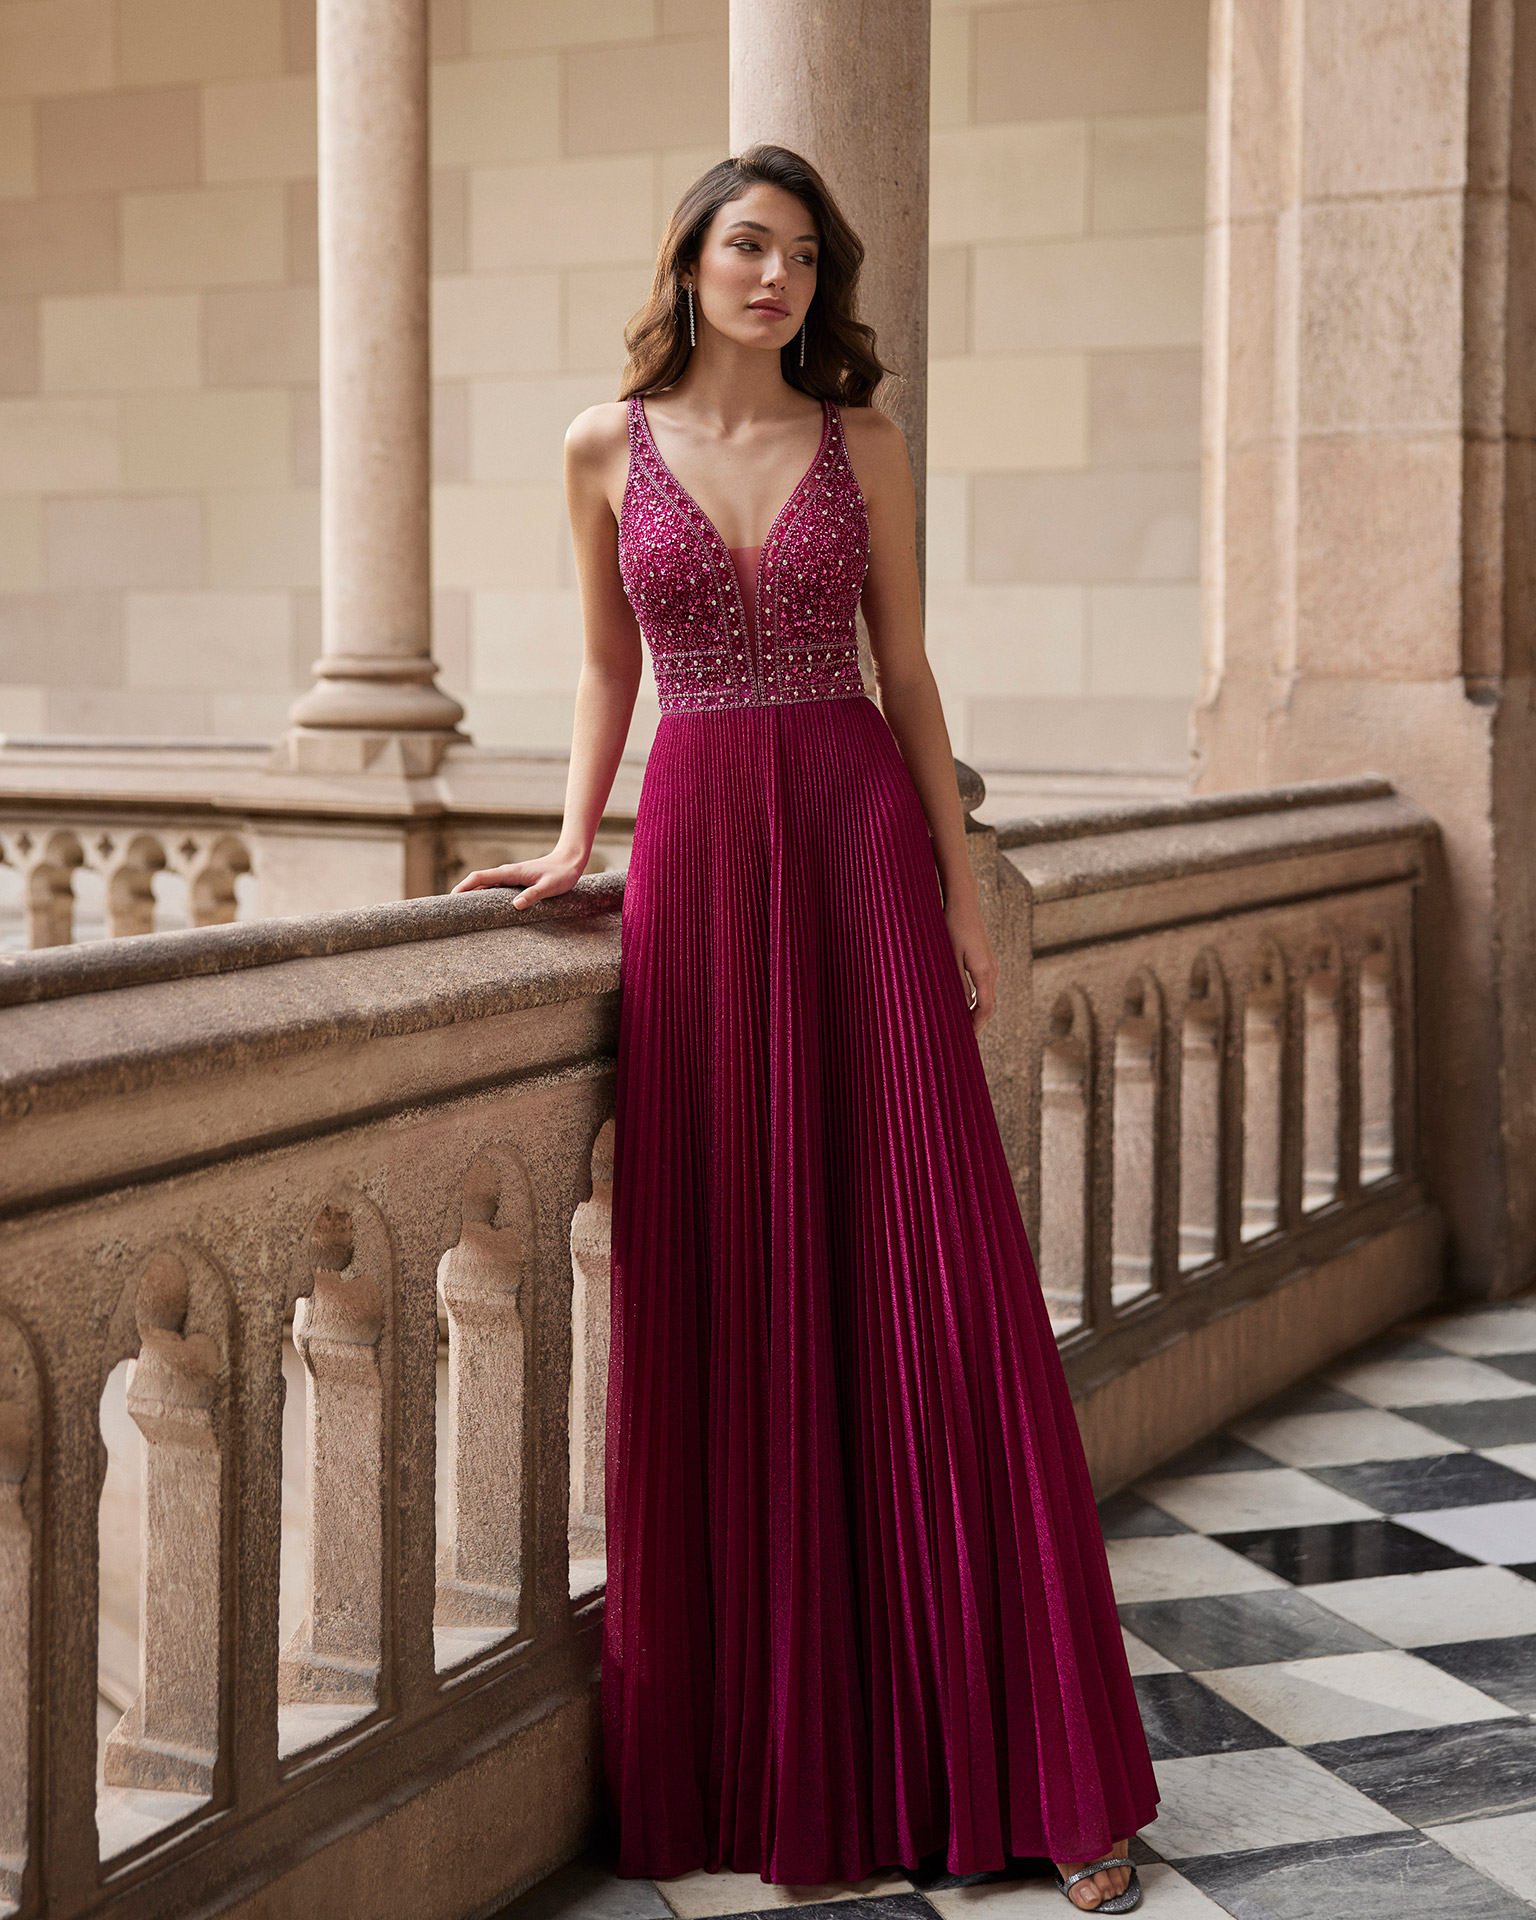 Elegant long evening dress, made of lurex. Marfil Barcelona design with a beaded lace bodice, a V-neckline, and a back with crossed shoulder straps. MARFIL_BARCELONA.